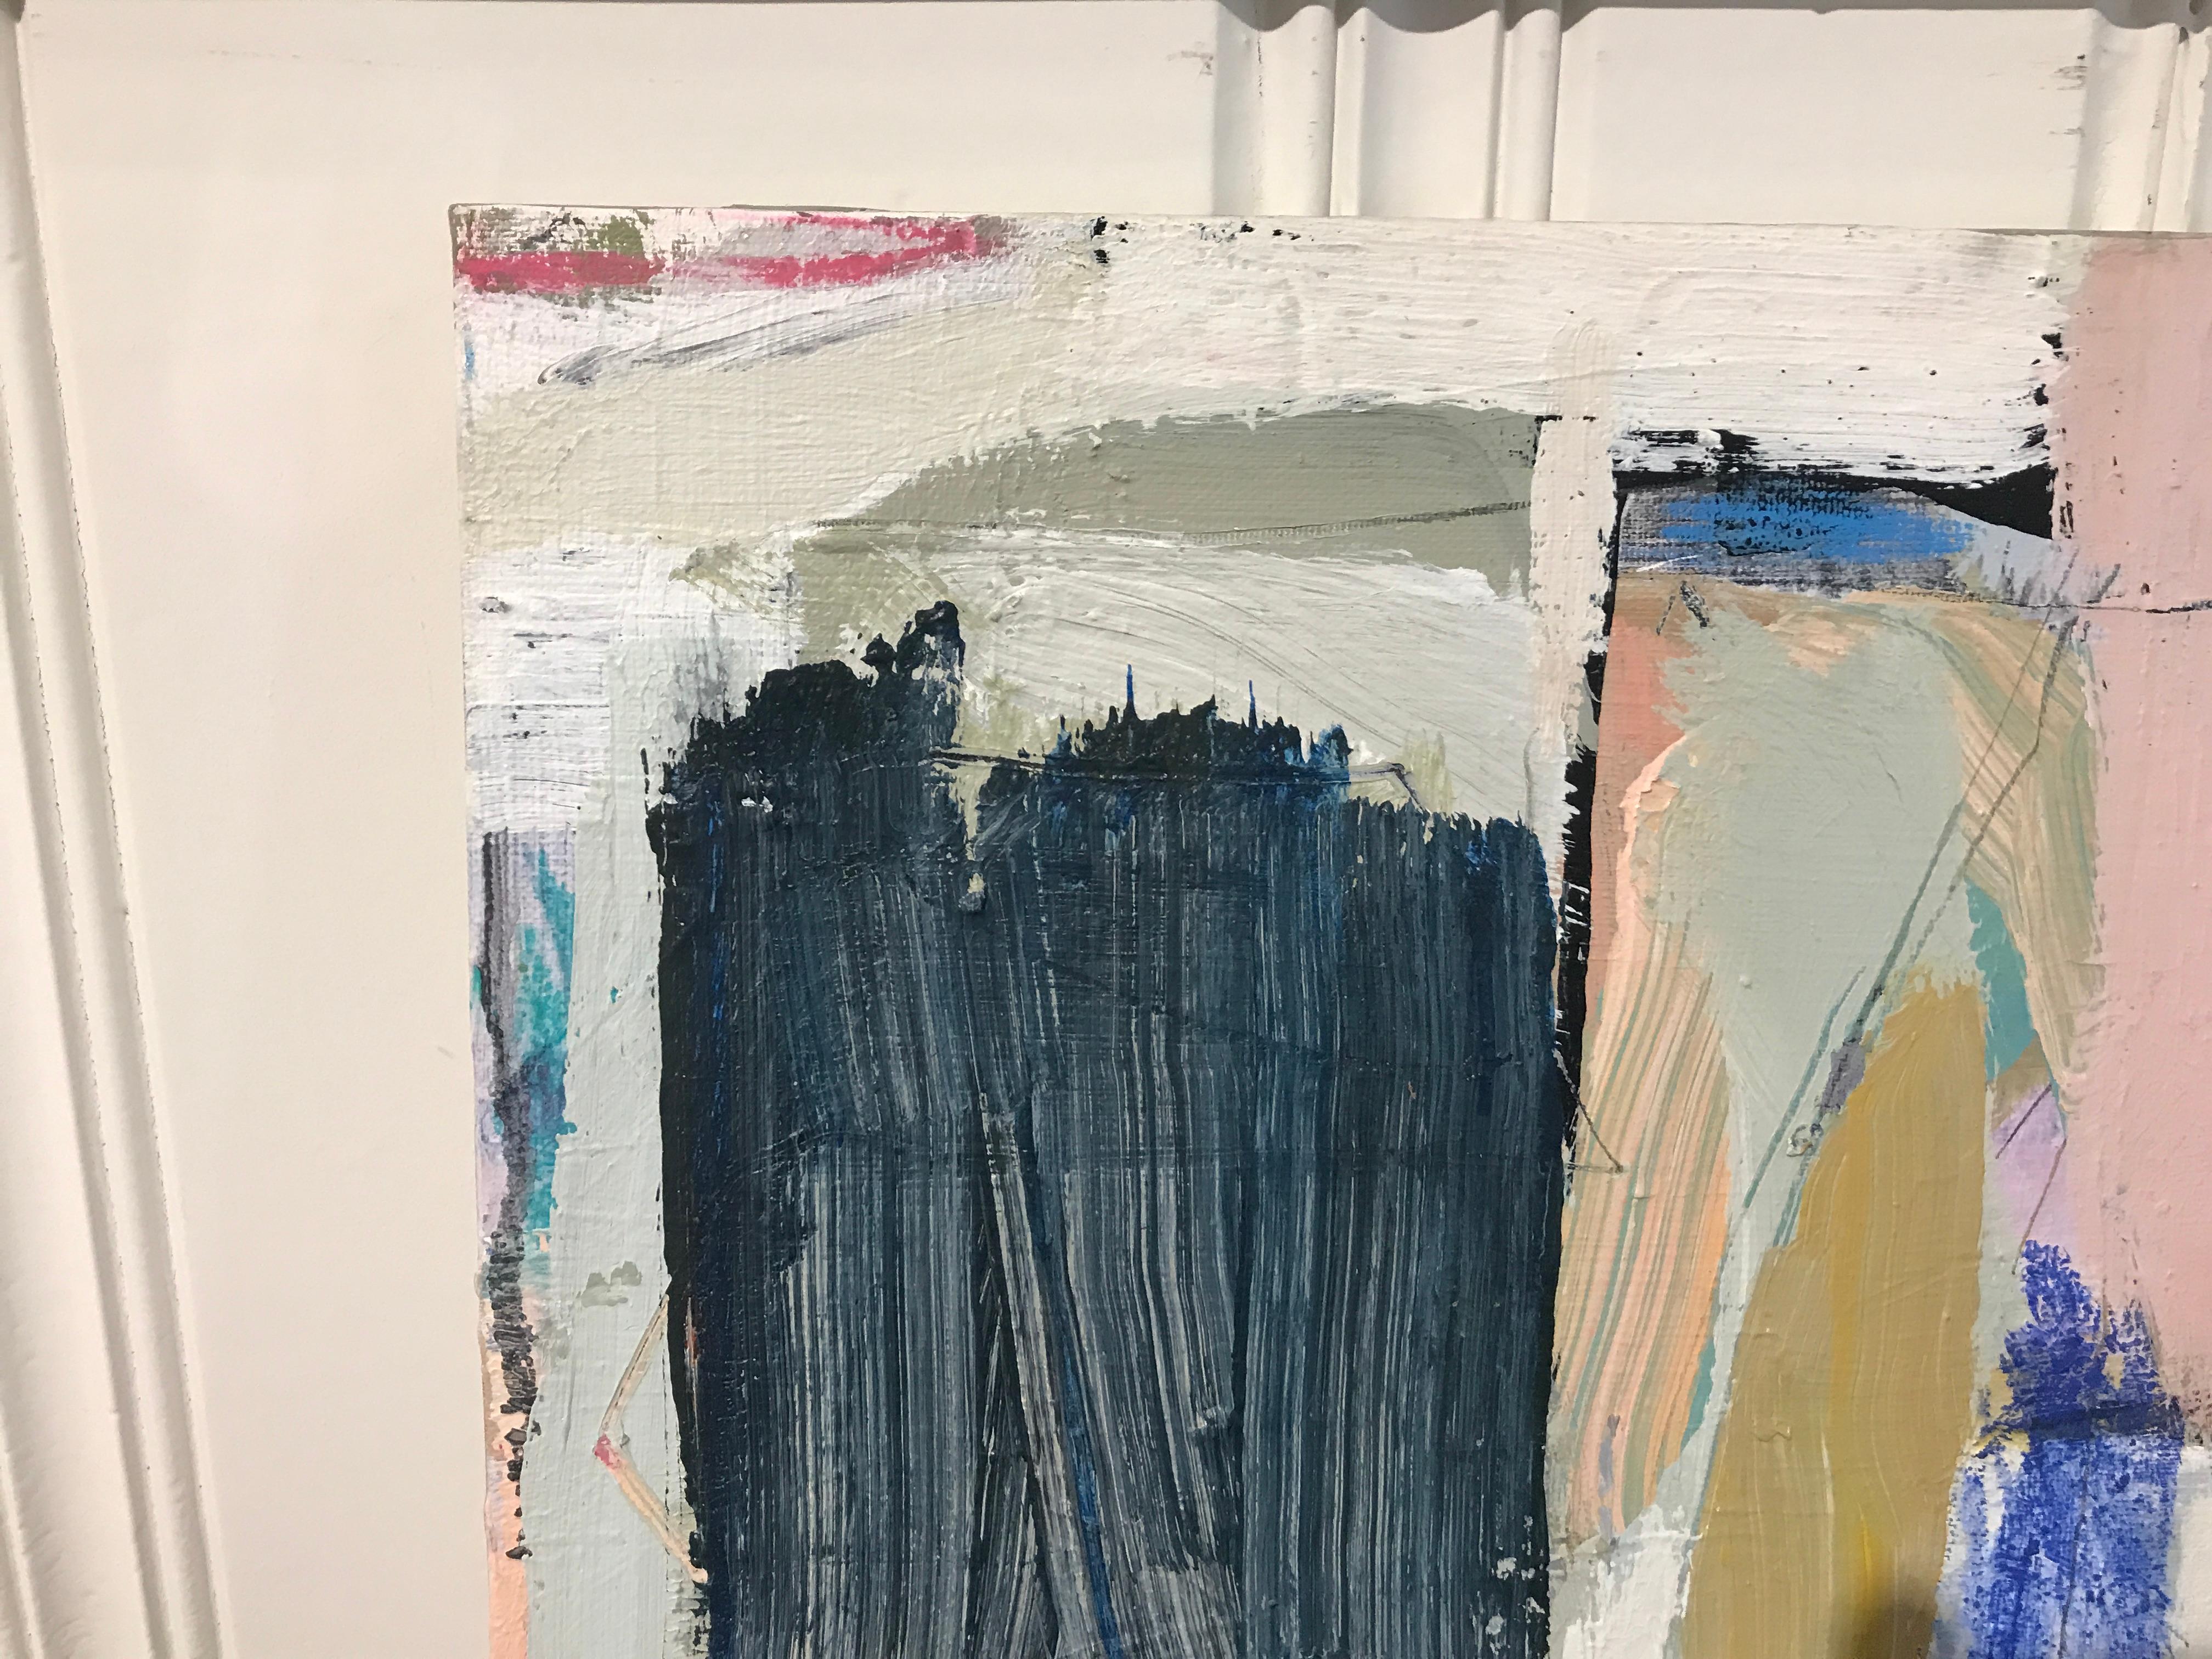 'Landscape Dream' is a small abstract acrylic and mixed media on canvas painting created by American artist Ellen Rolli in 2019. Featuring a palette mostly made of cream, black, soft pink, blue and ocher tones, the painting exudes an impression of